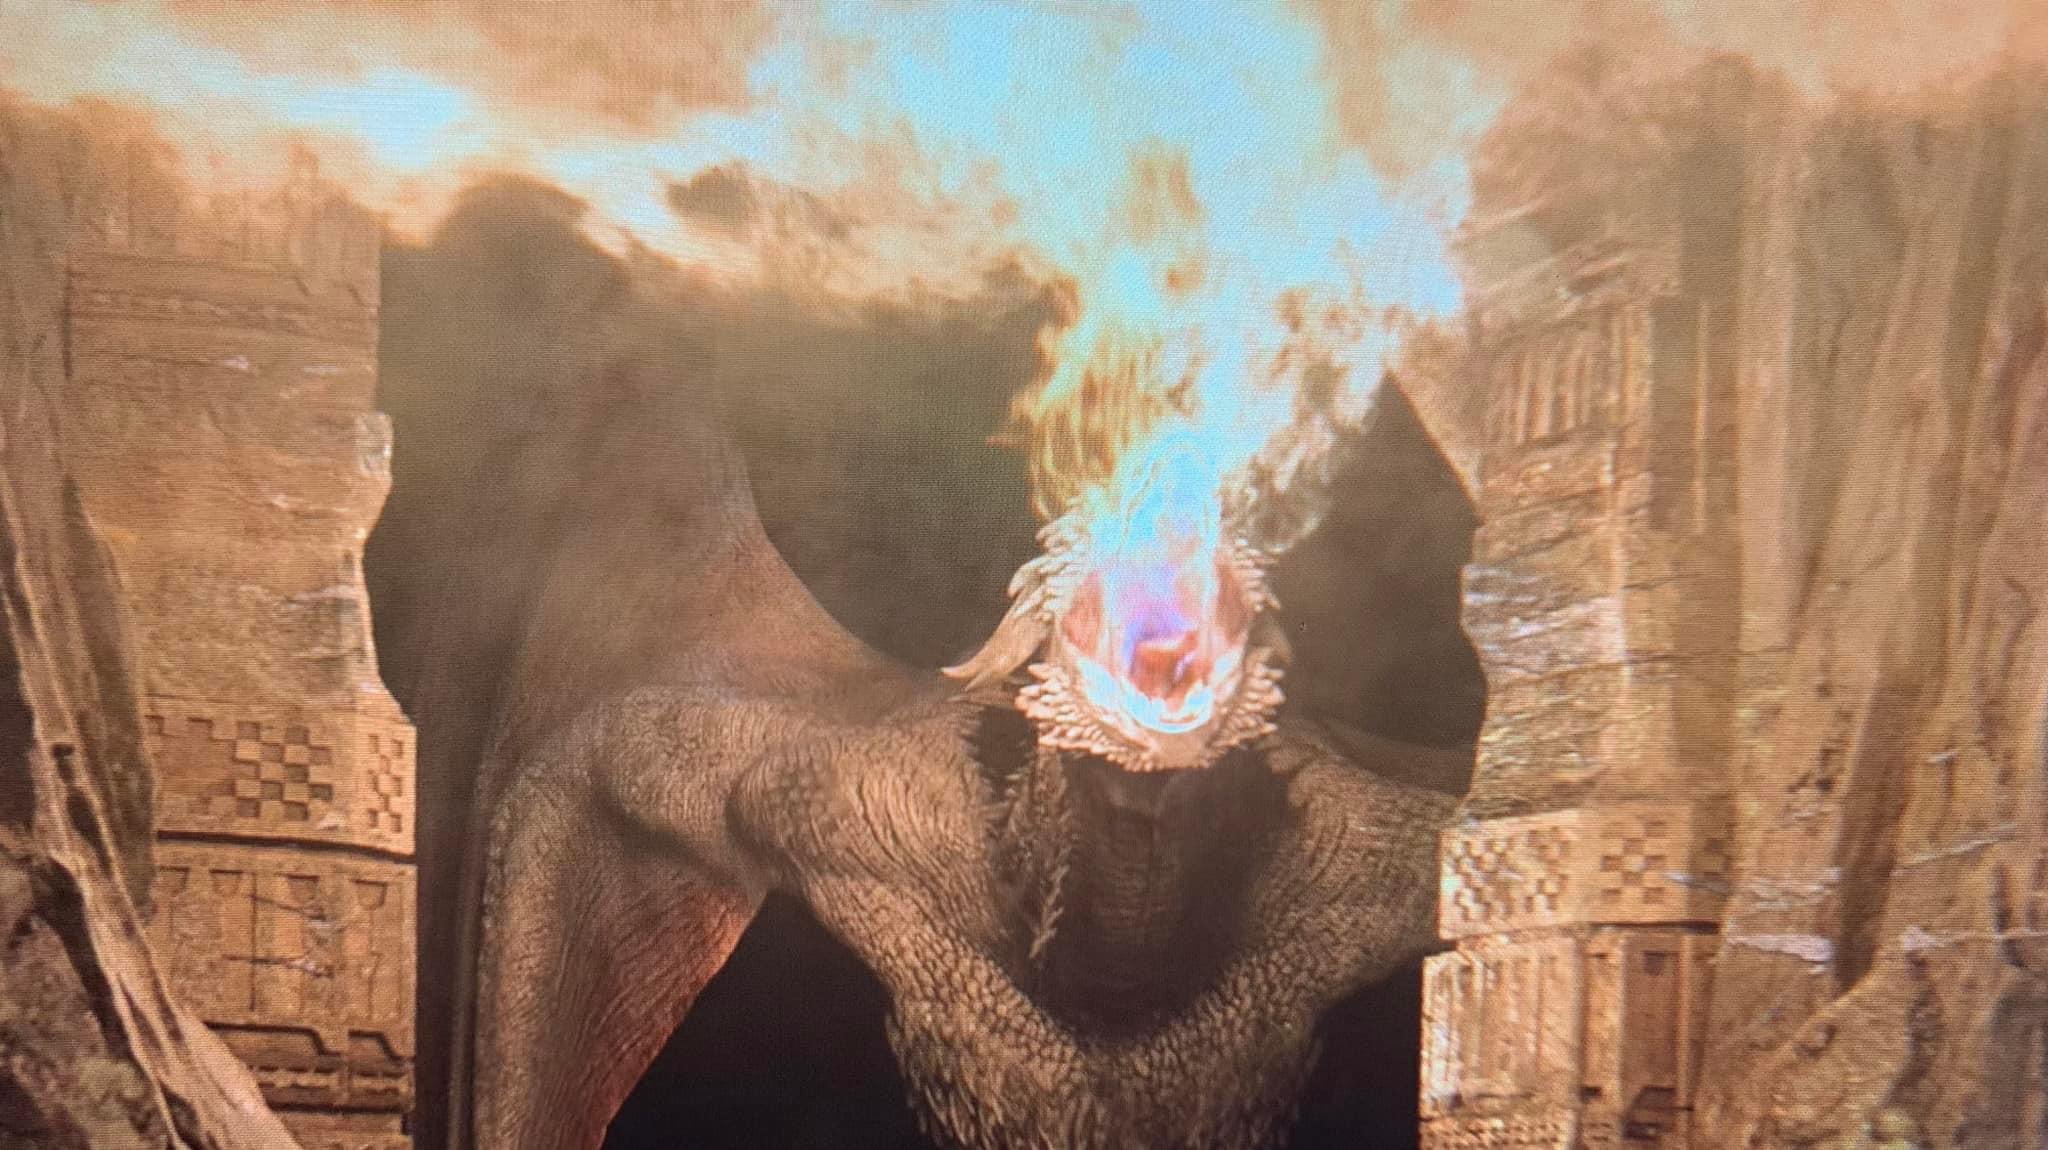 dreamfyre in season 1 of house of the dragon